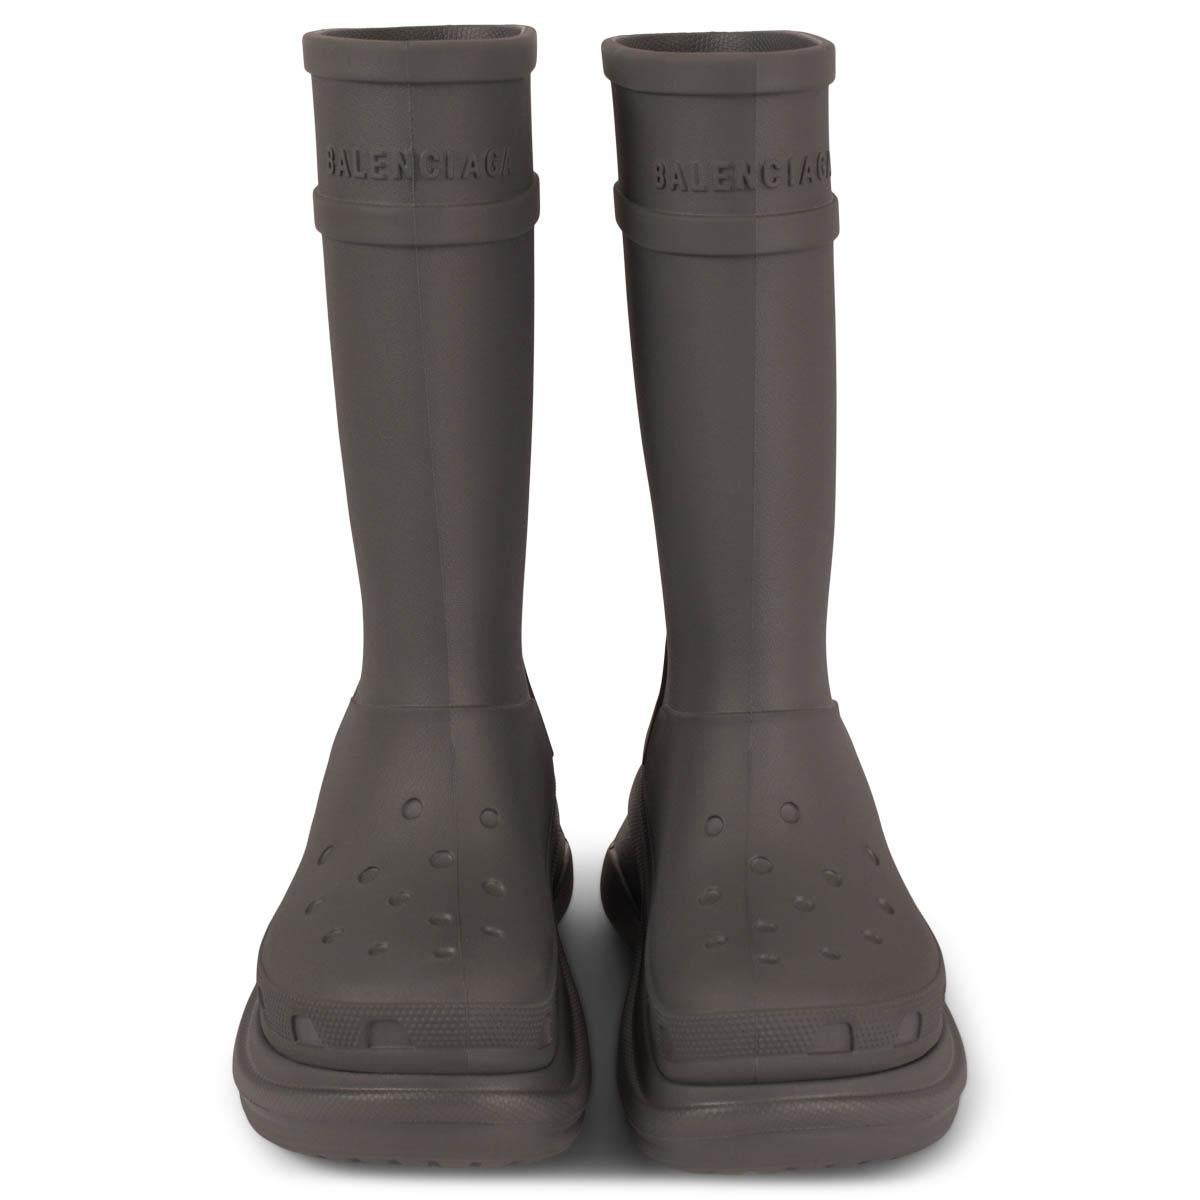 100% authentic Balenciaga x Croc 2.0 rain boots in Grafite (dark grey) rubber. Feature logo embossing on the front, chunky soles and a rounded toe. Lined in viscose (100%). Have been worn and are in excellent condition. Come with dust bags. 

2022